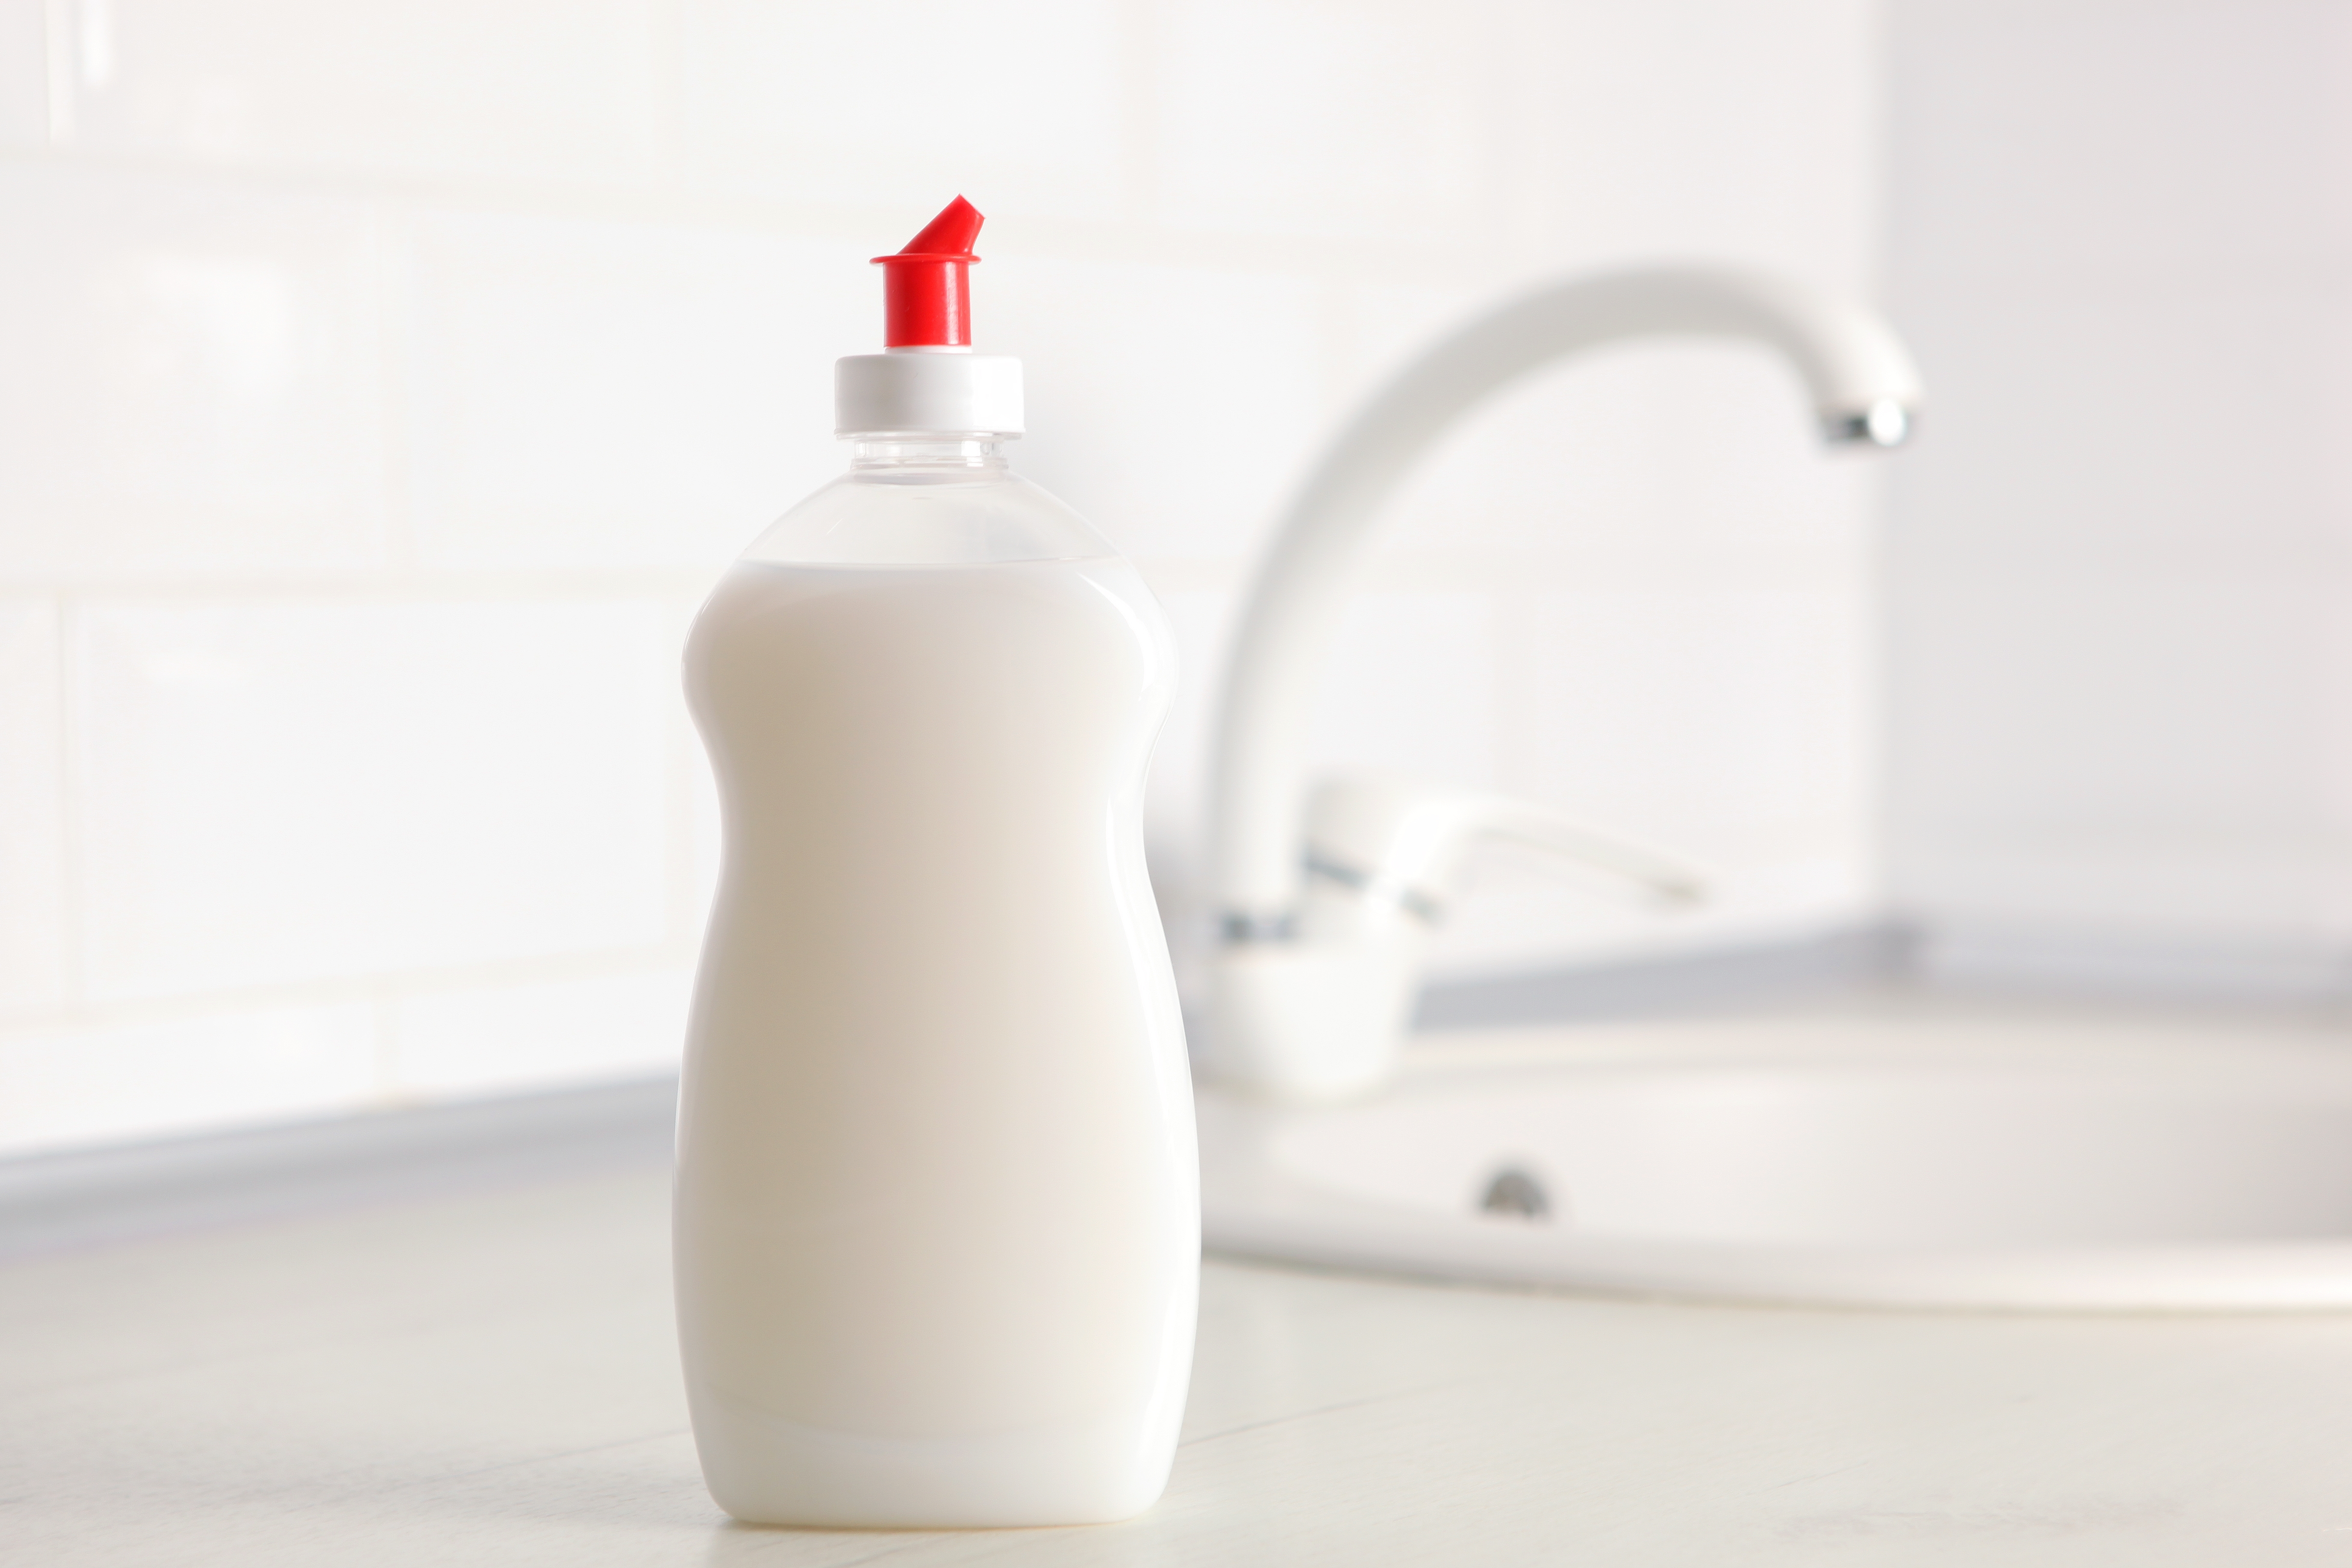 Mix equal parts water and dish soap in a spray bottle and apply directly to the roach. | Source: Shutterstock